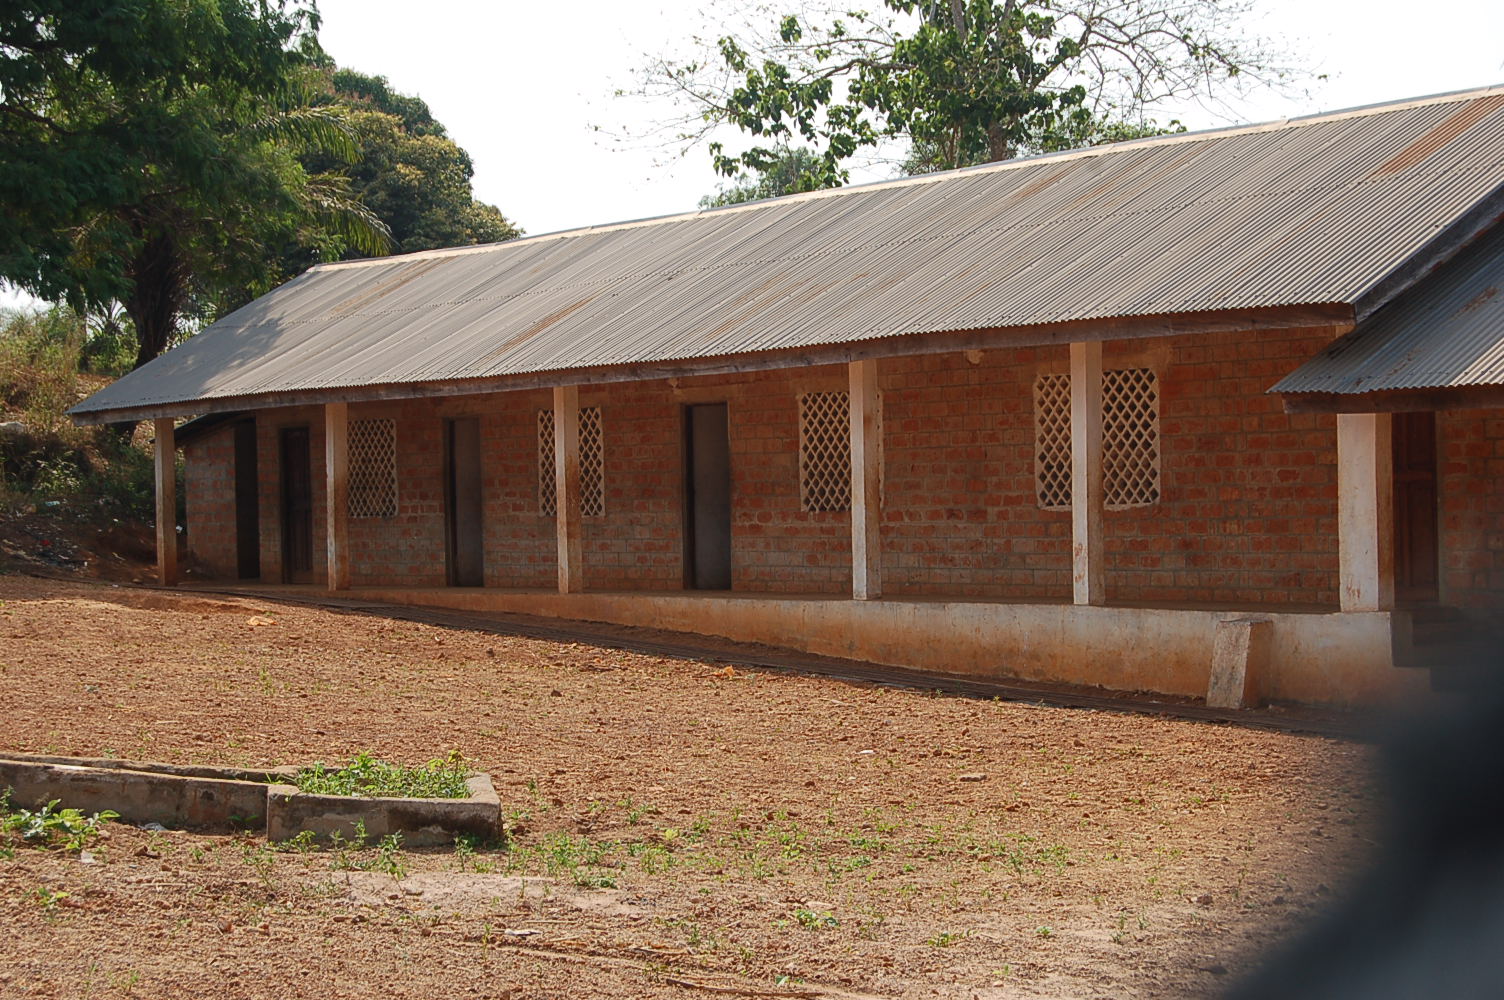 Mabeni School for the Blind